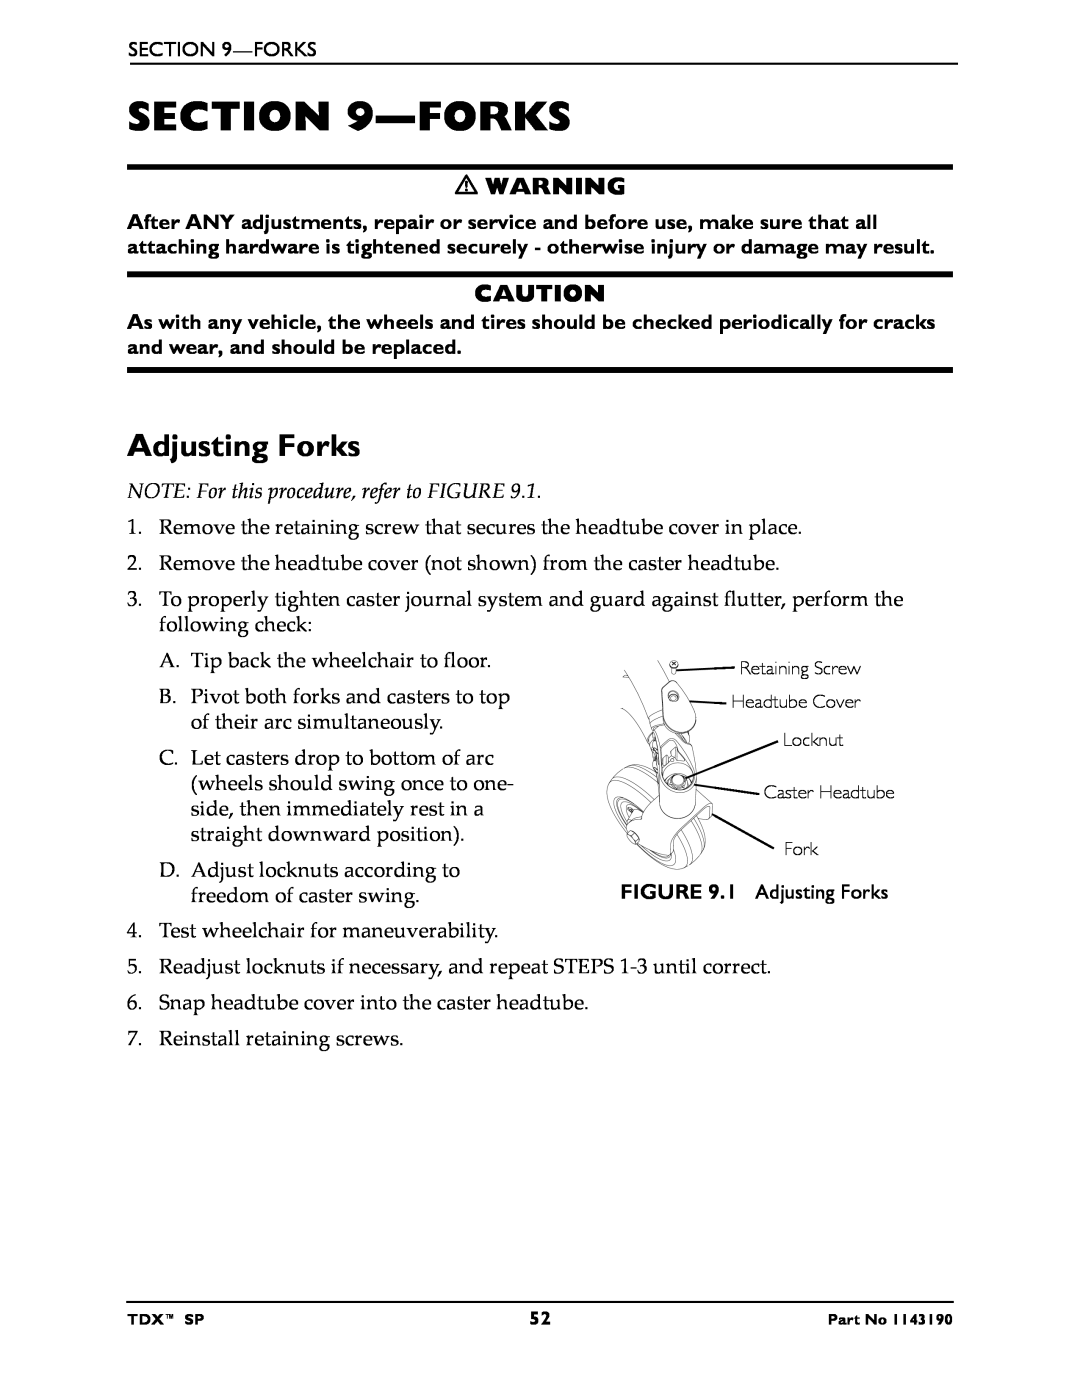 Invacare SP manual Adjusting Forks, NOTE For this procedure, refer to FIGURE 